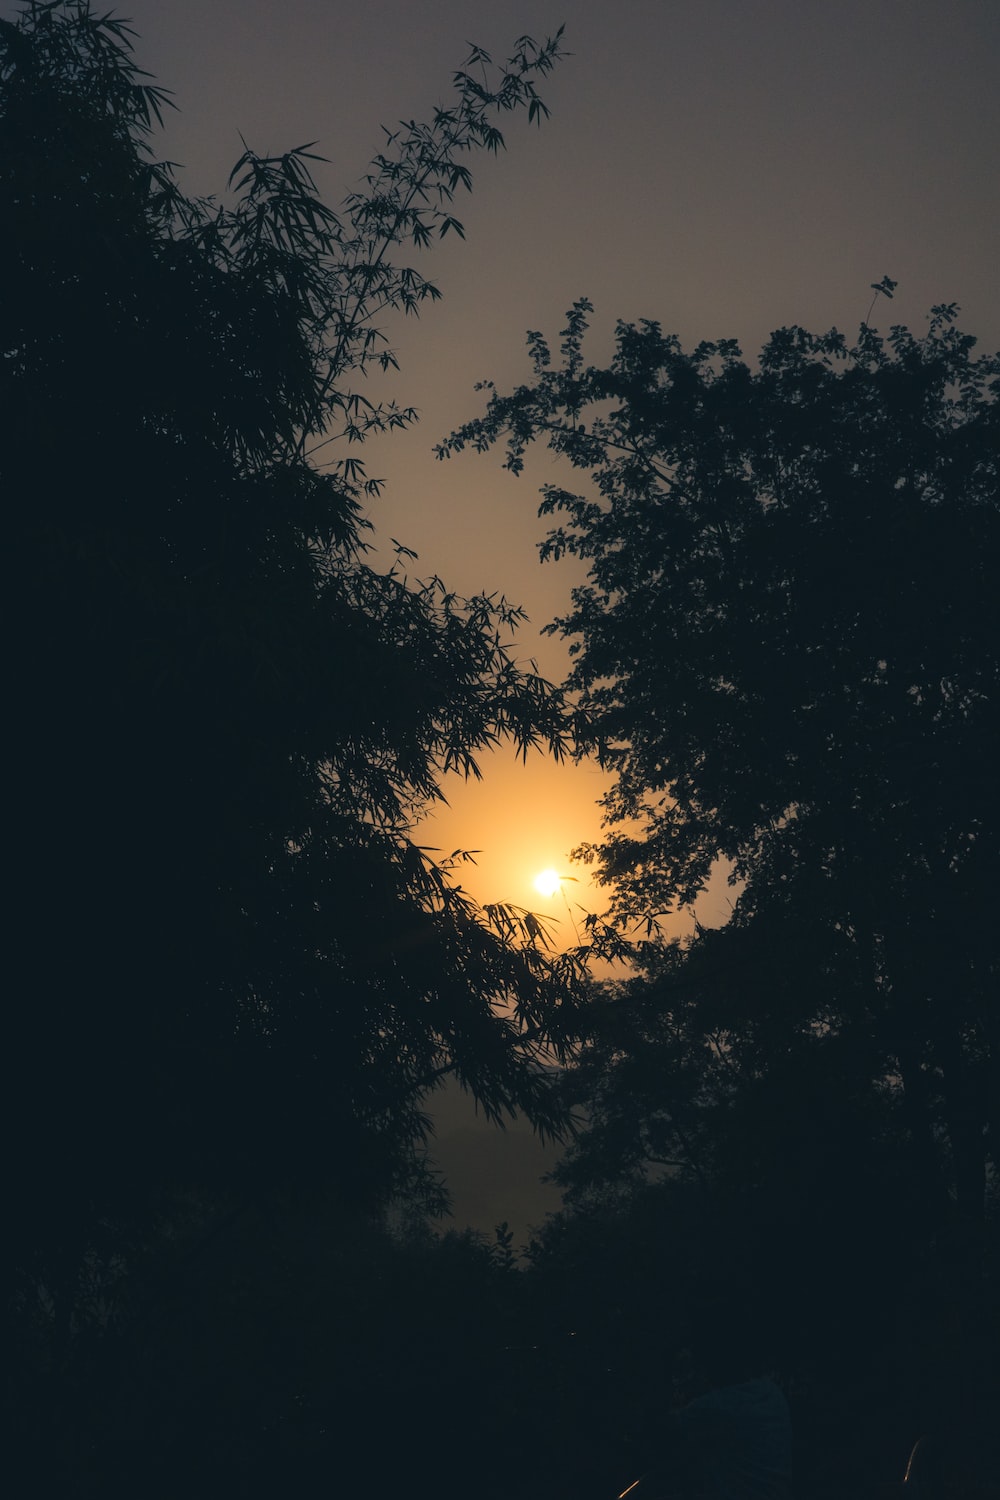 the sun is setting behind some trees